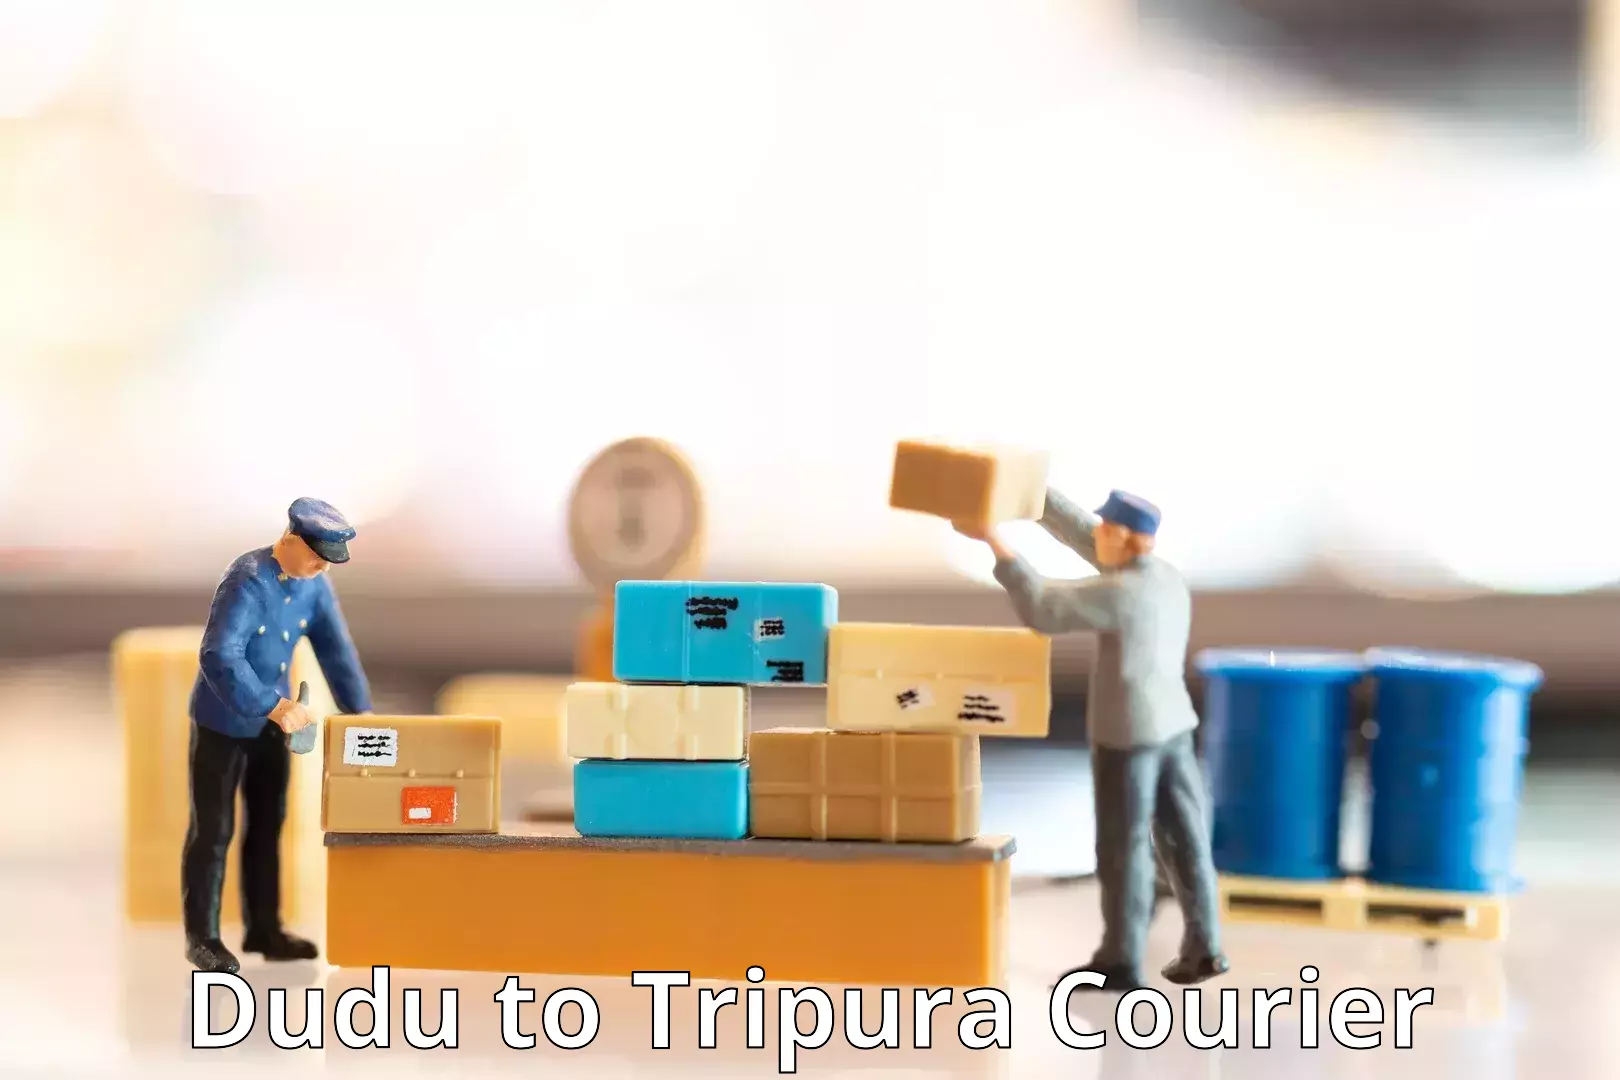 On-call courier service Dudu to Tripura